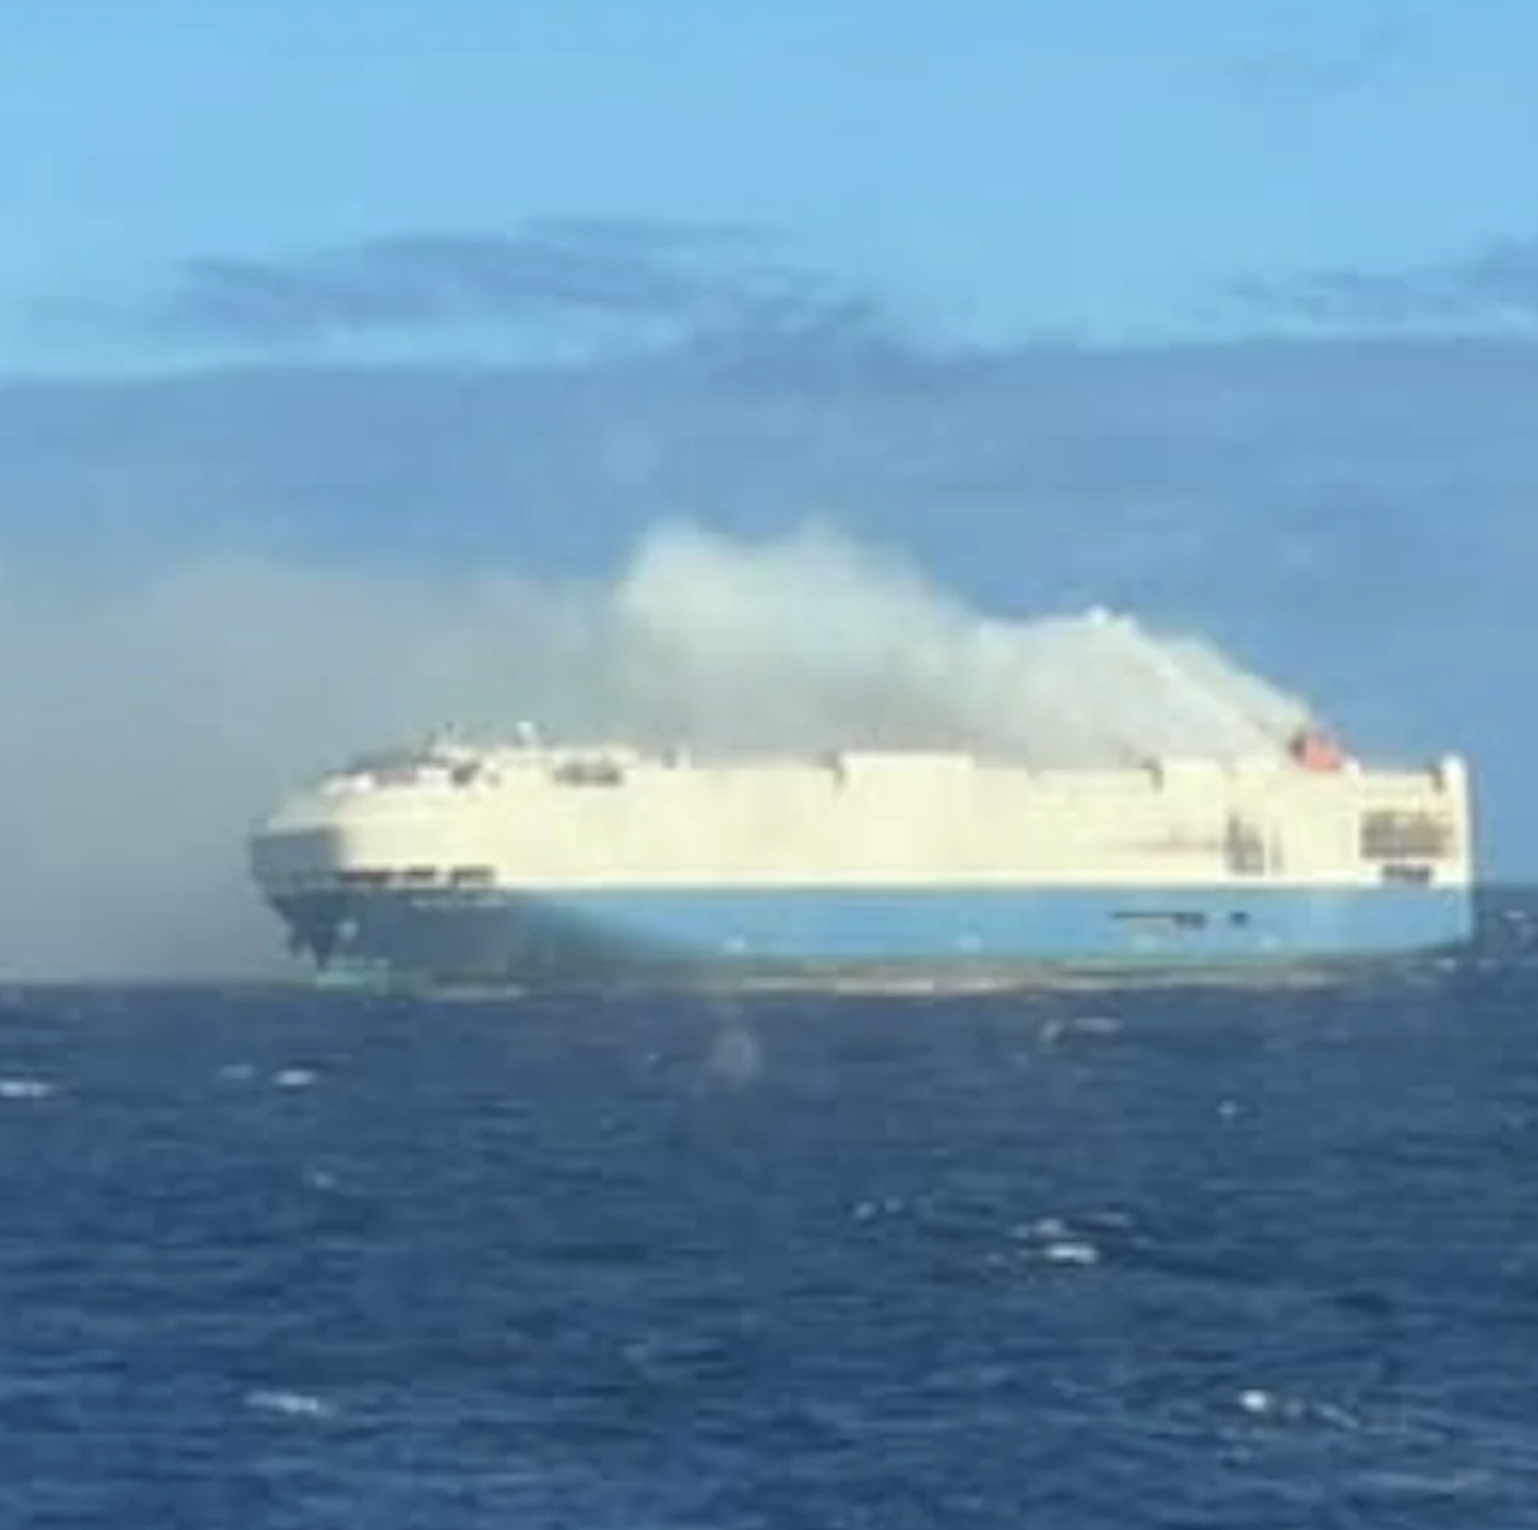 Salvage Operations Are Underway for Porsche-Carrying Cargo Ship That Caught Fire